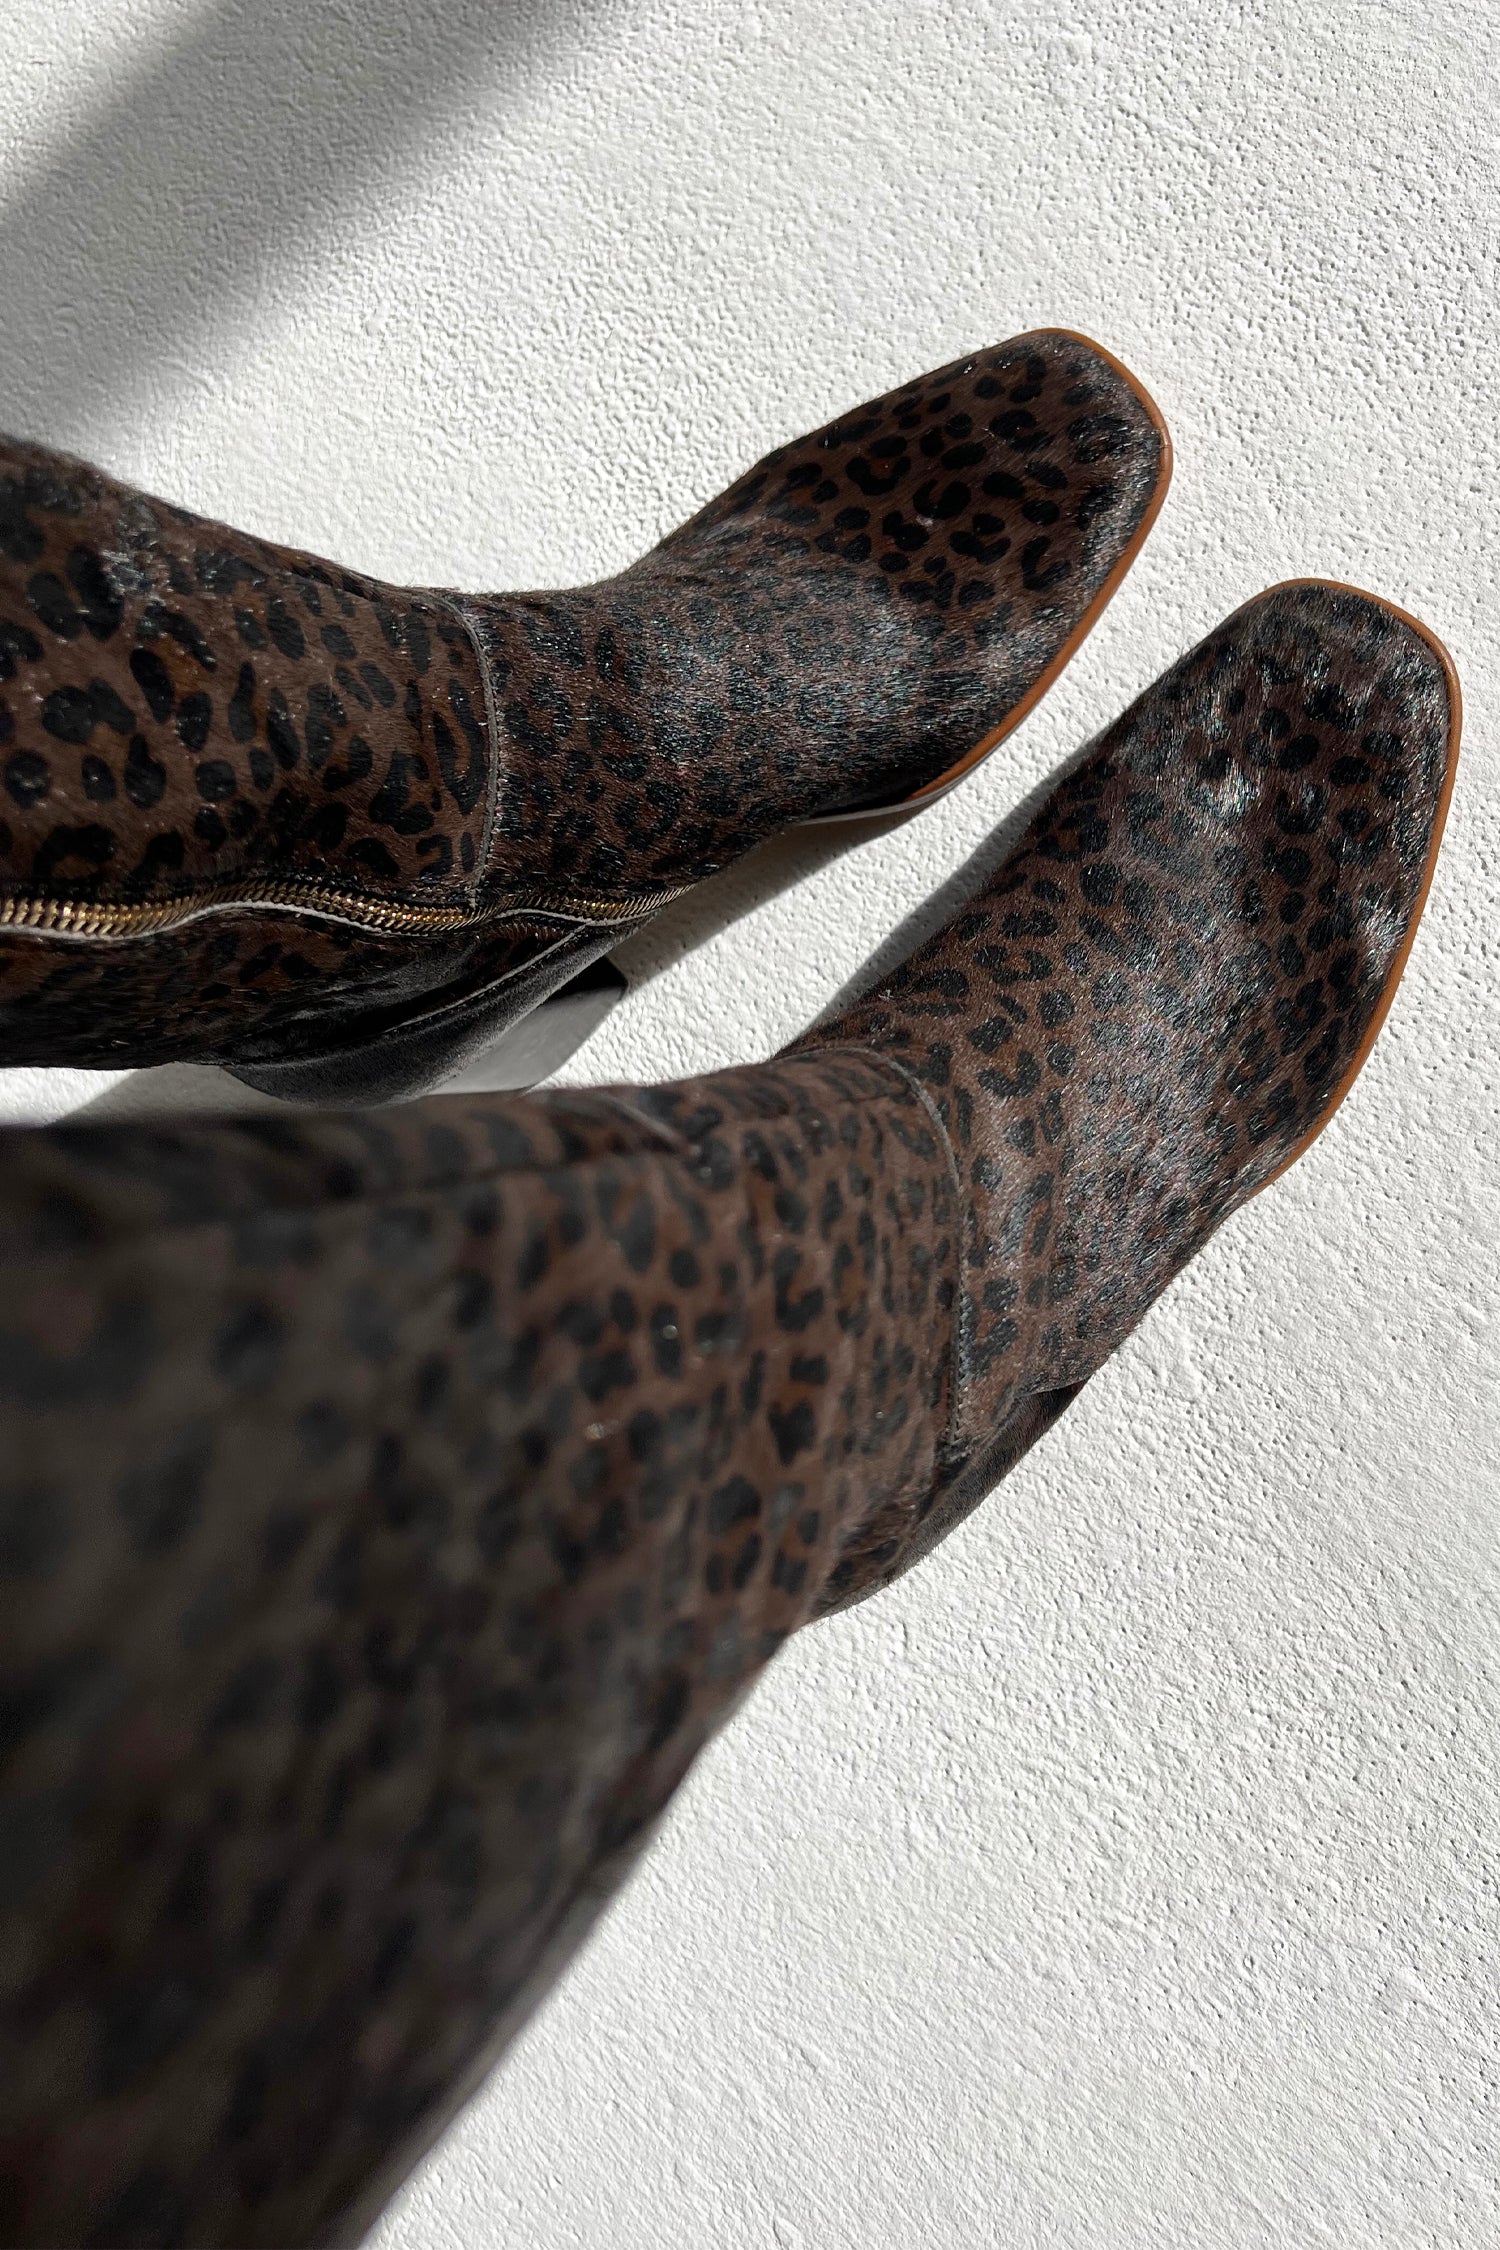 Model wearing Chocolate Leopard Long Boot standing facing the camera close up